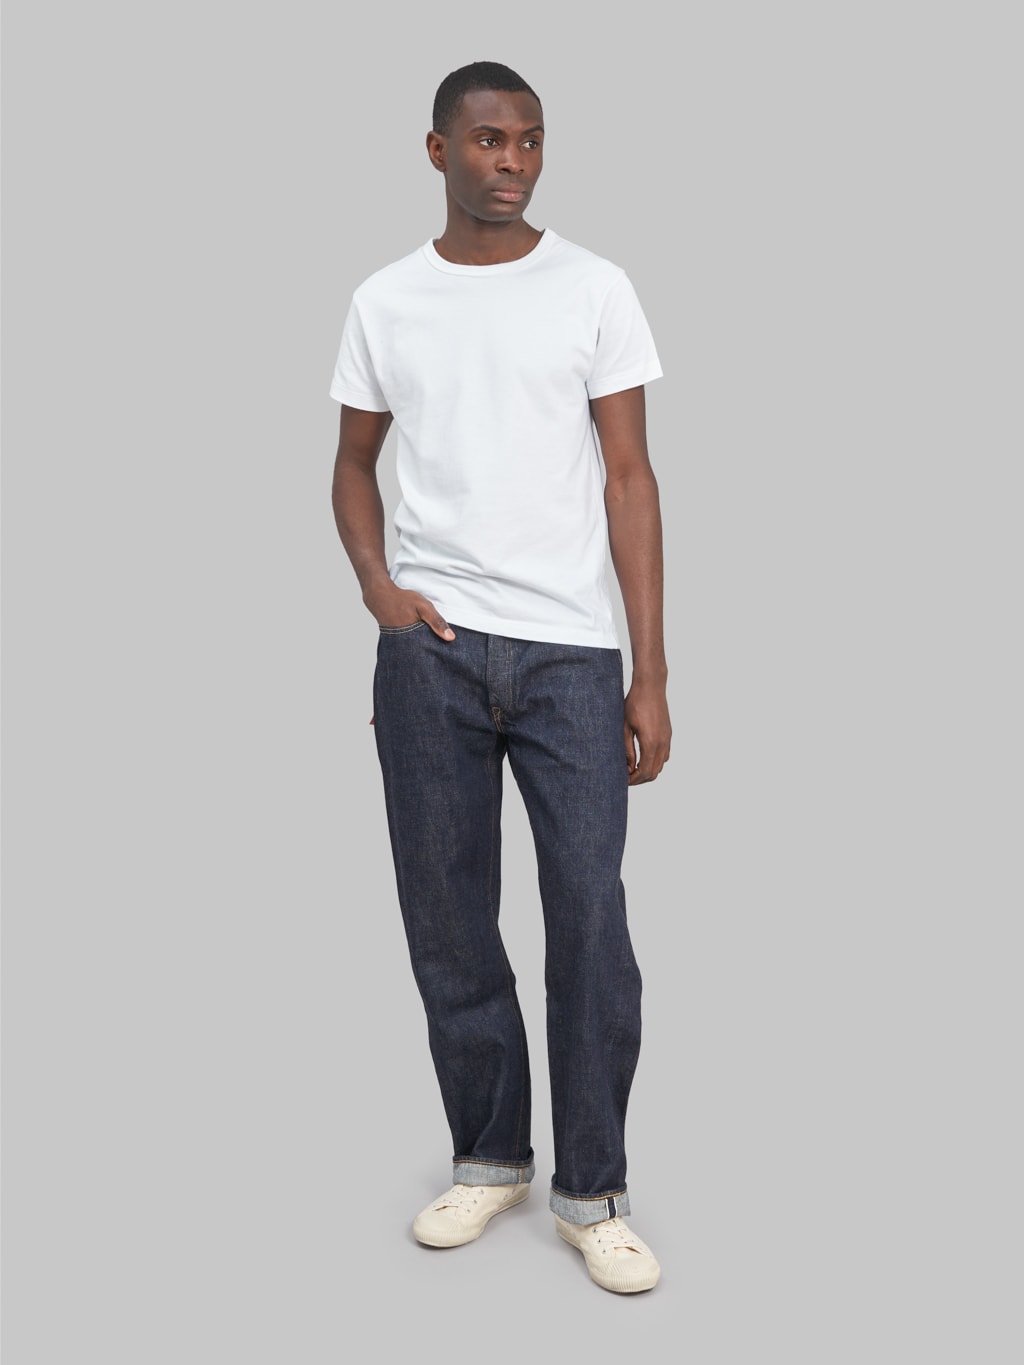 Fullcount 0105W 13.7oz Wide Straight Jeans